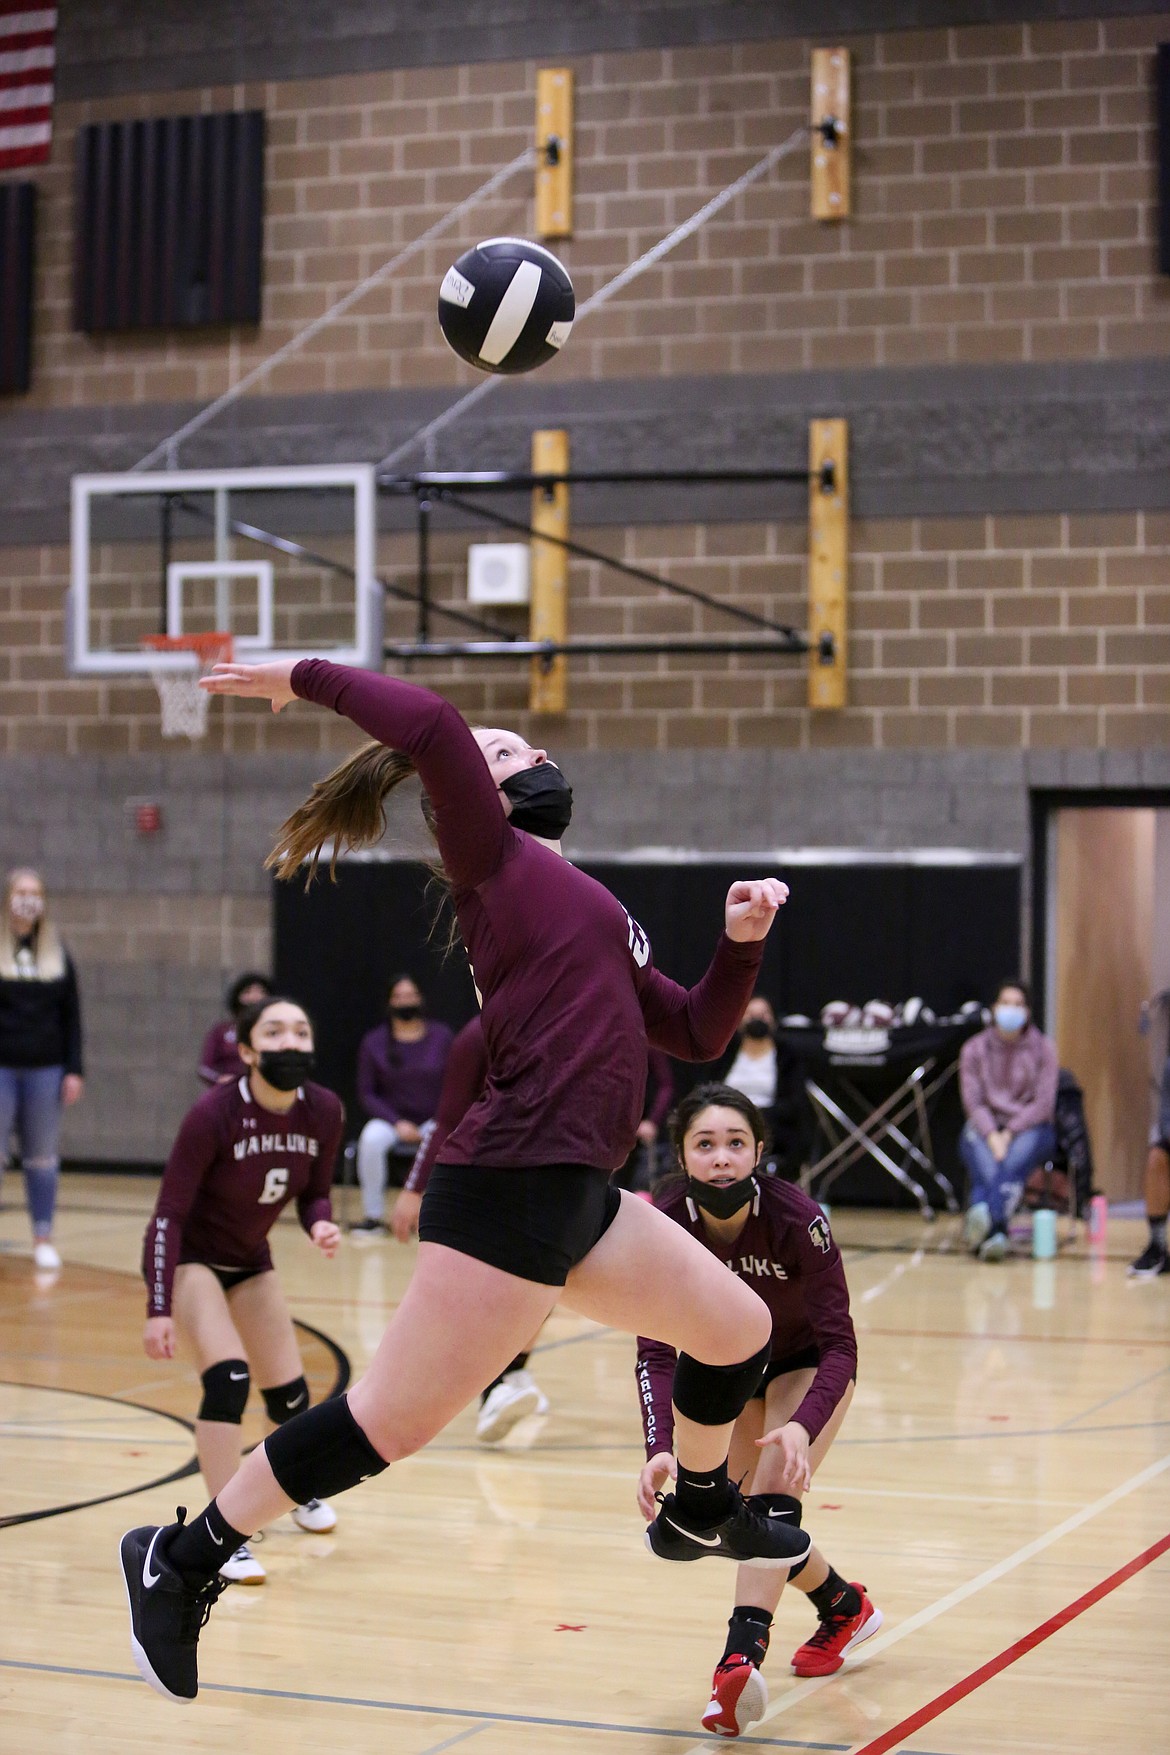 Madison Harlow skies up for the shot for Wahluke against Royal on Saturday afternoon in Royal City.